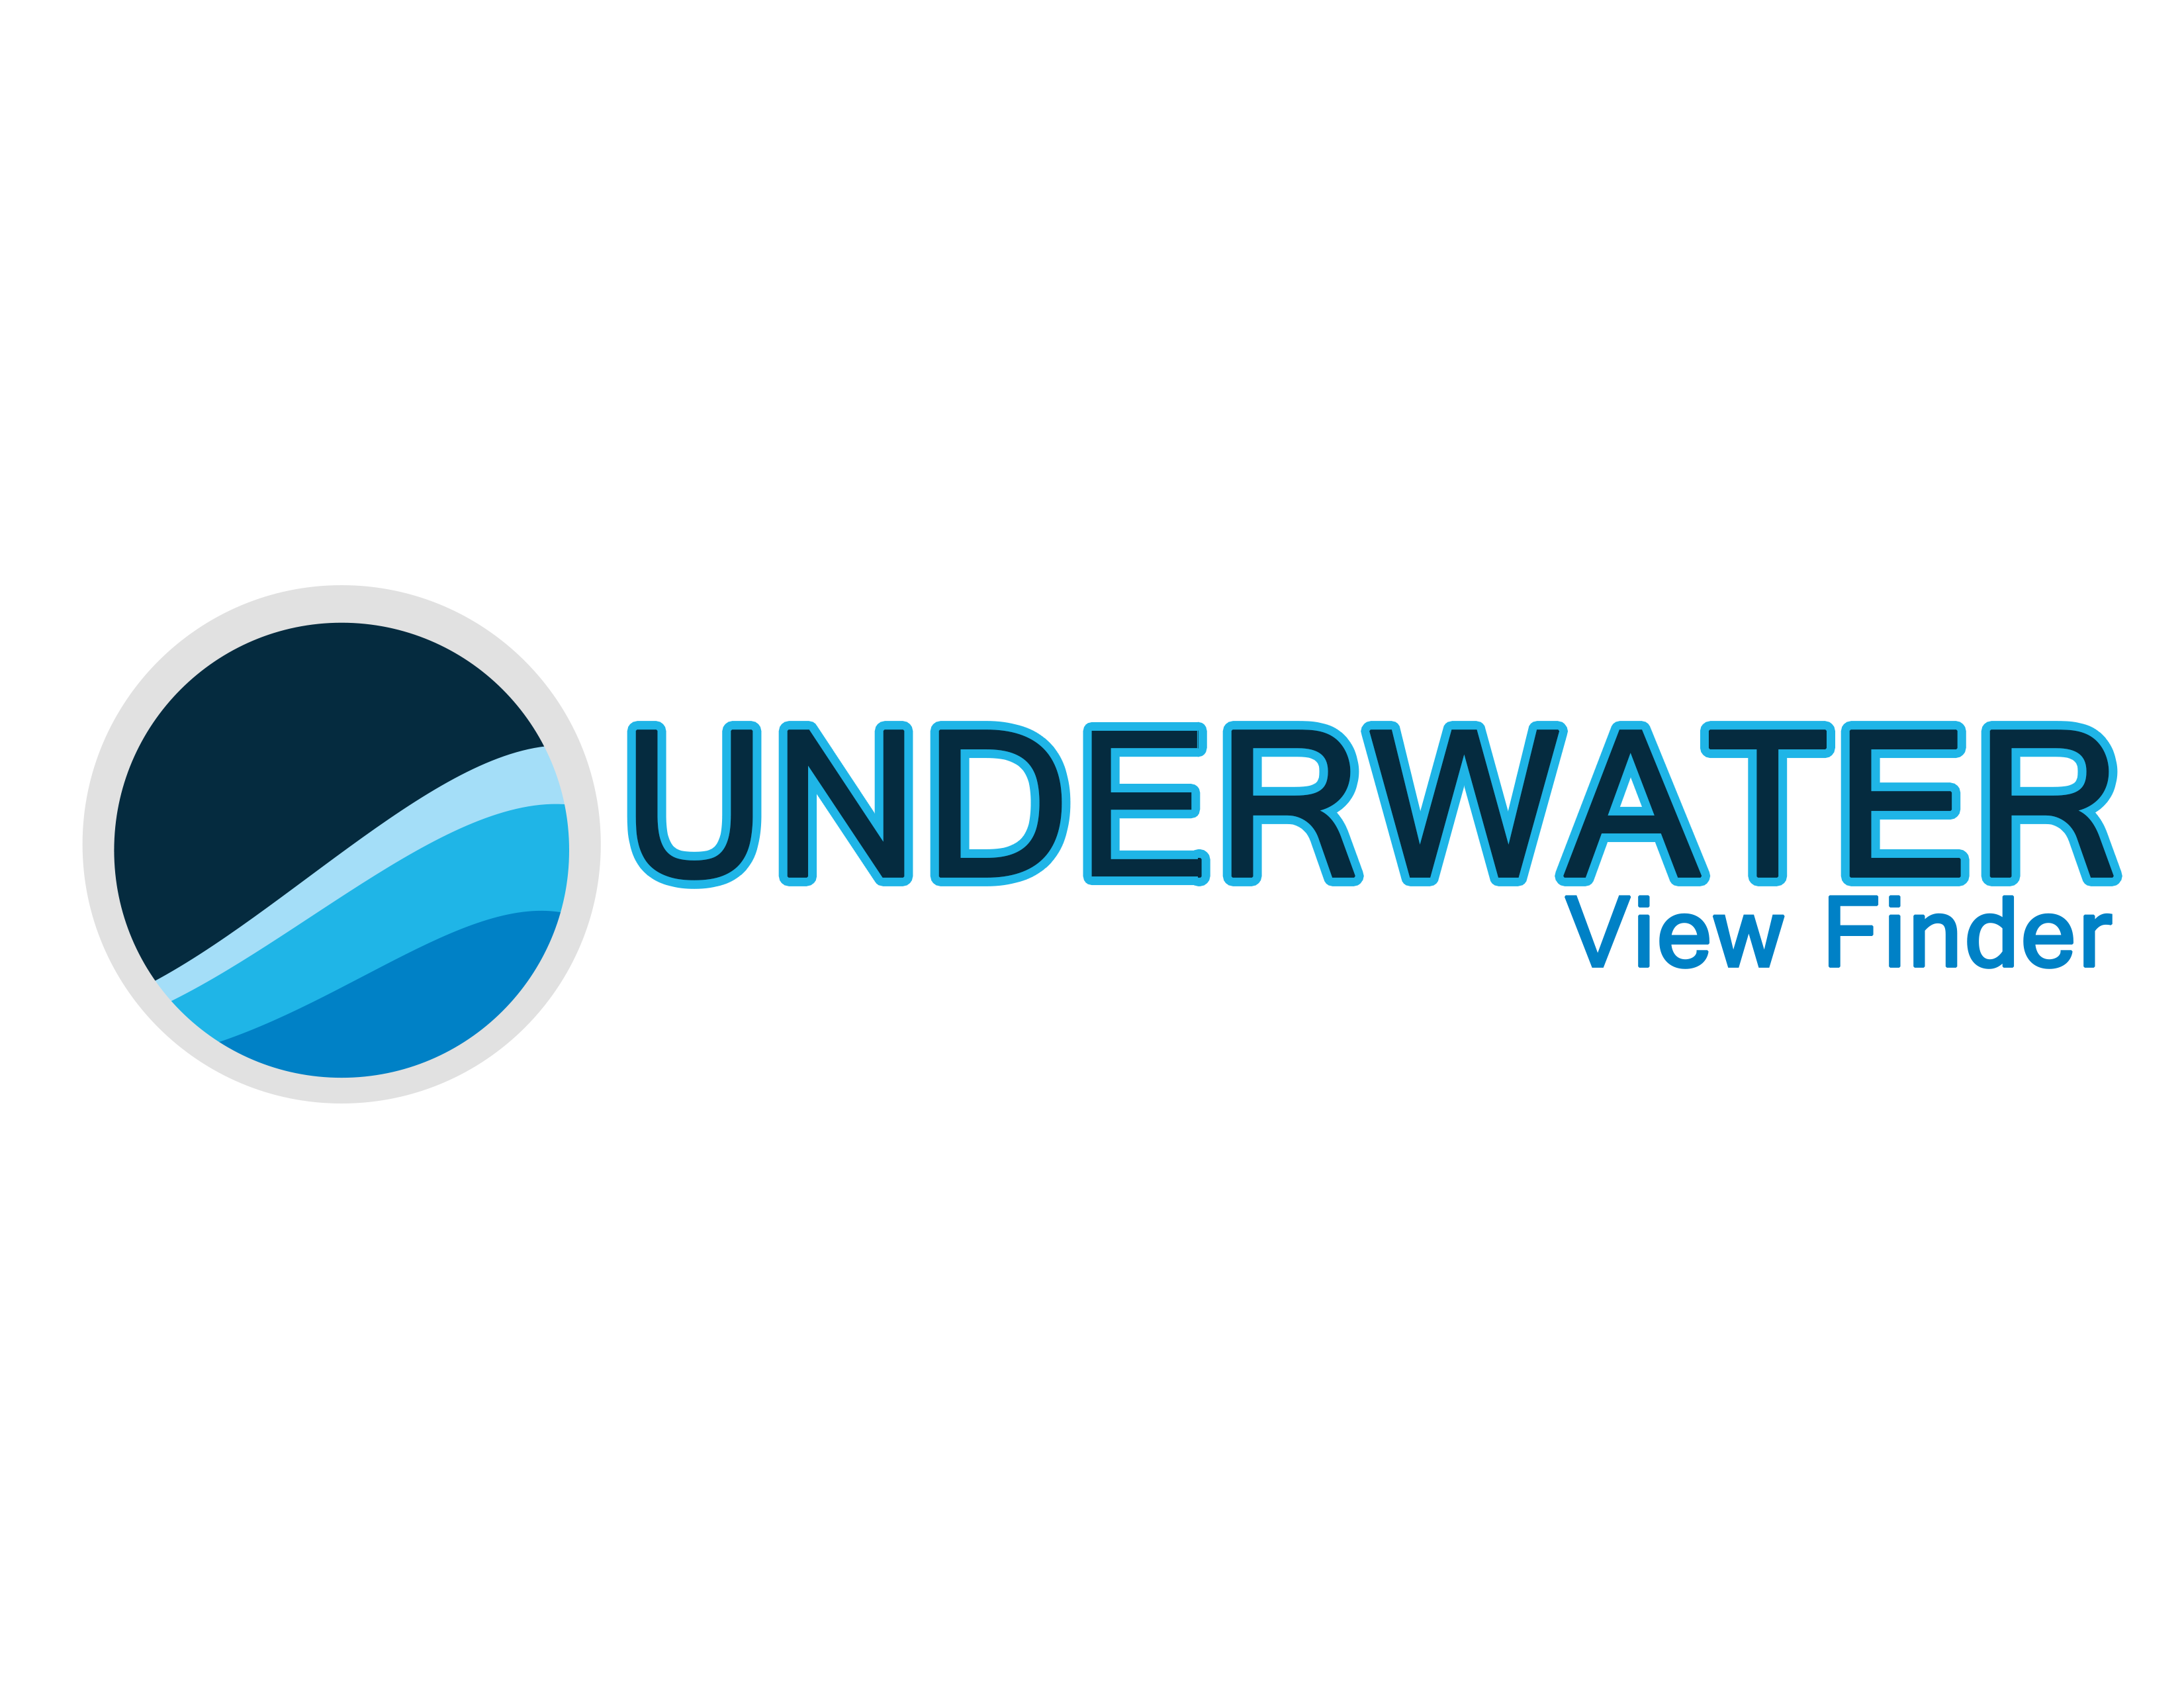 The Underwater View Finder is the perfect new invention for any fans of the underwater world.